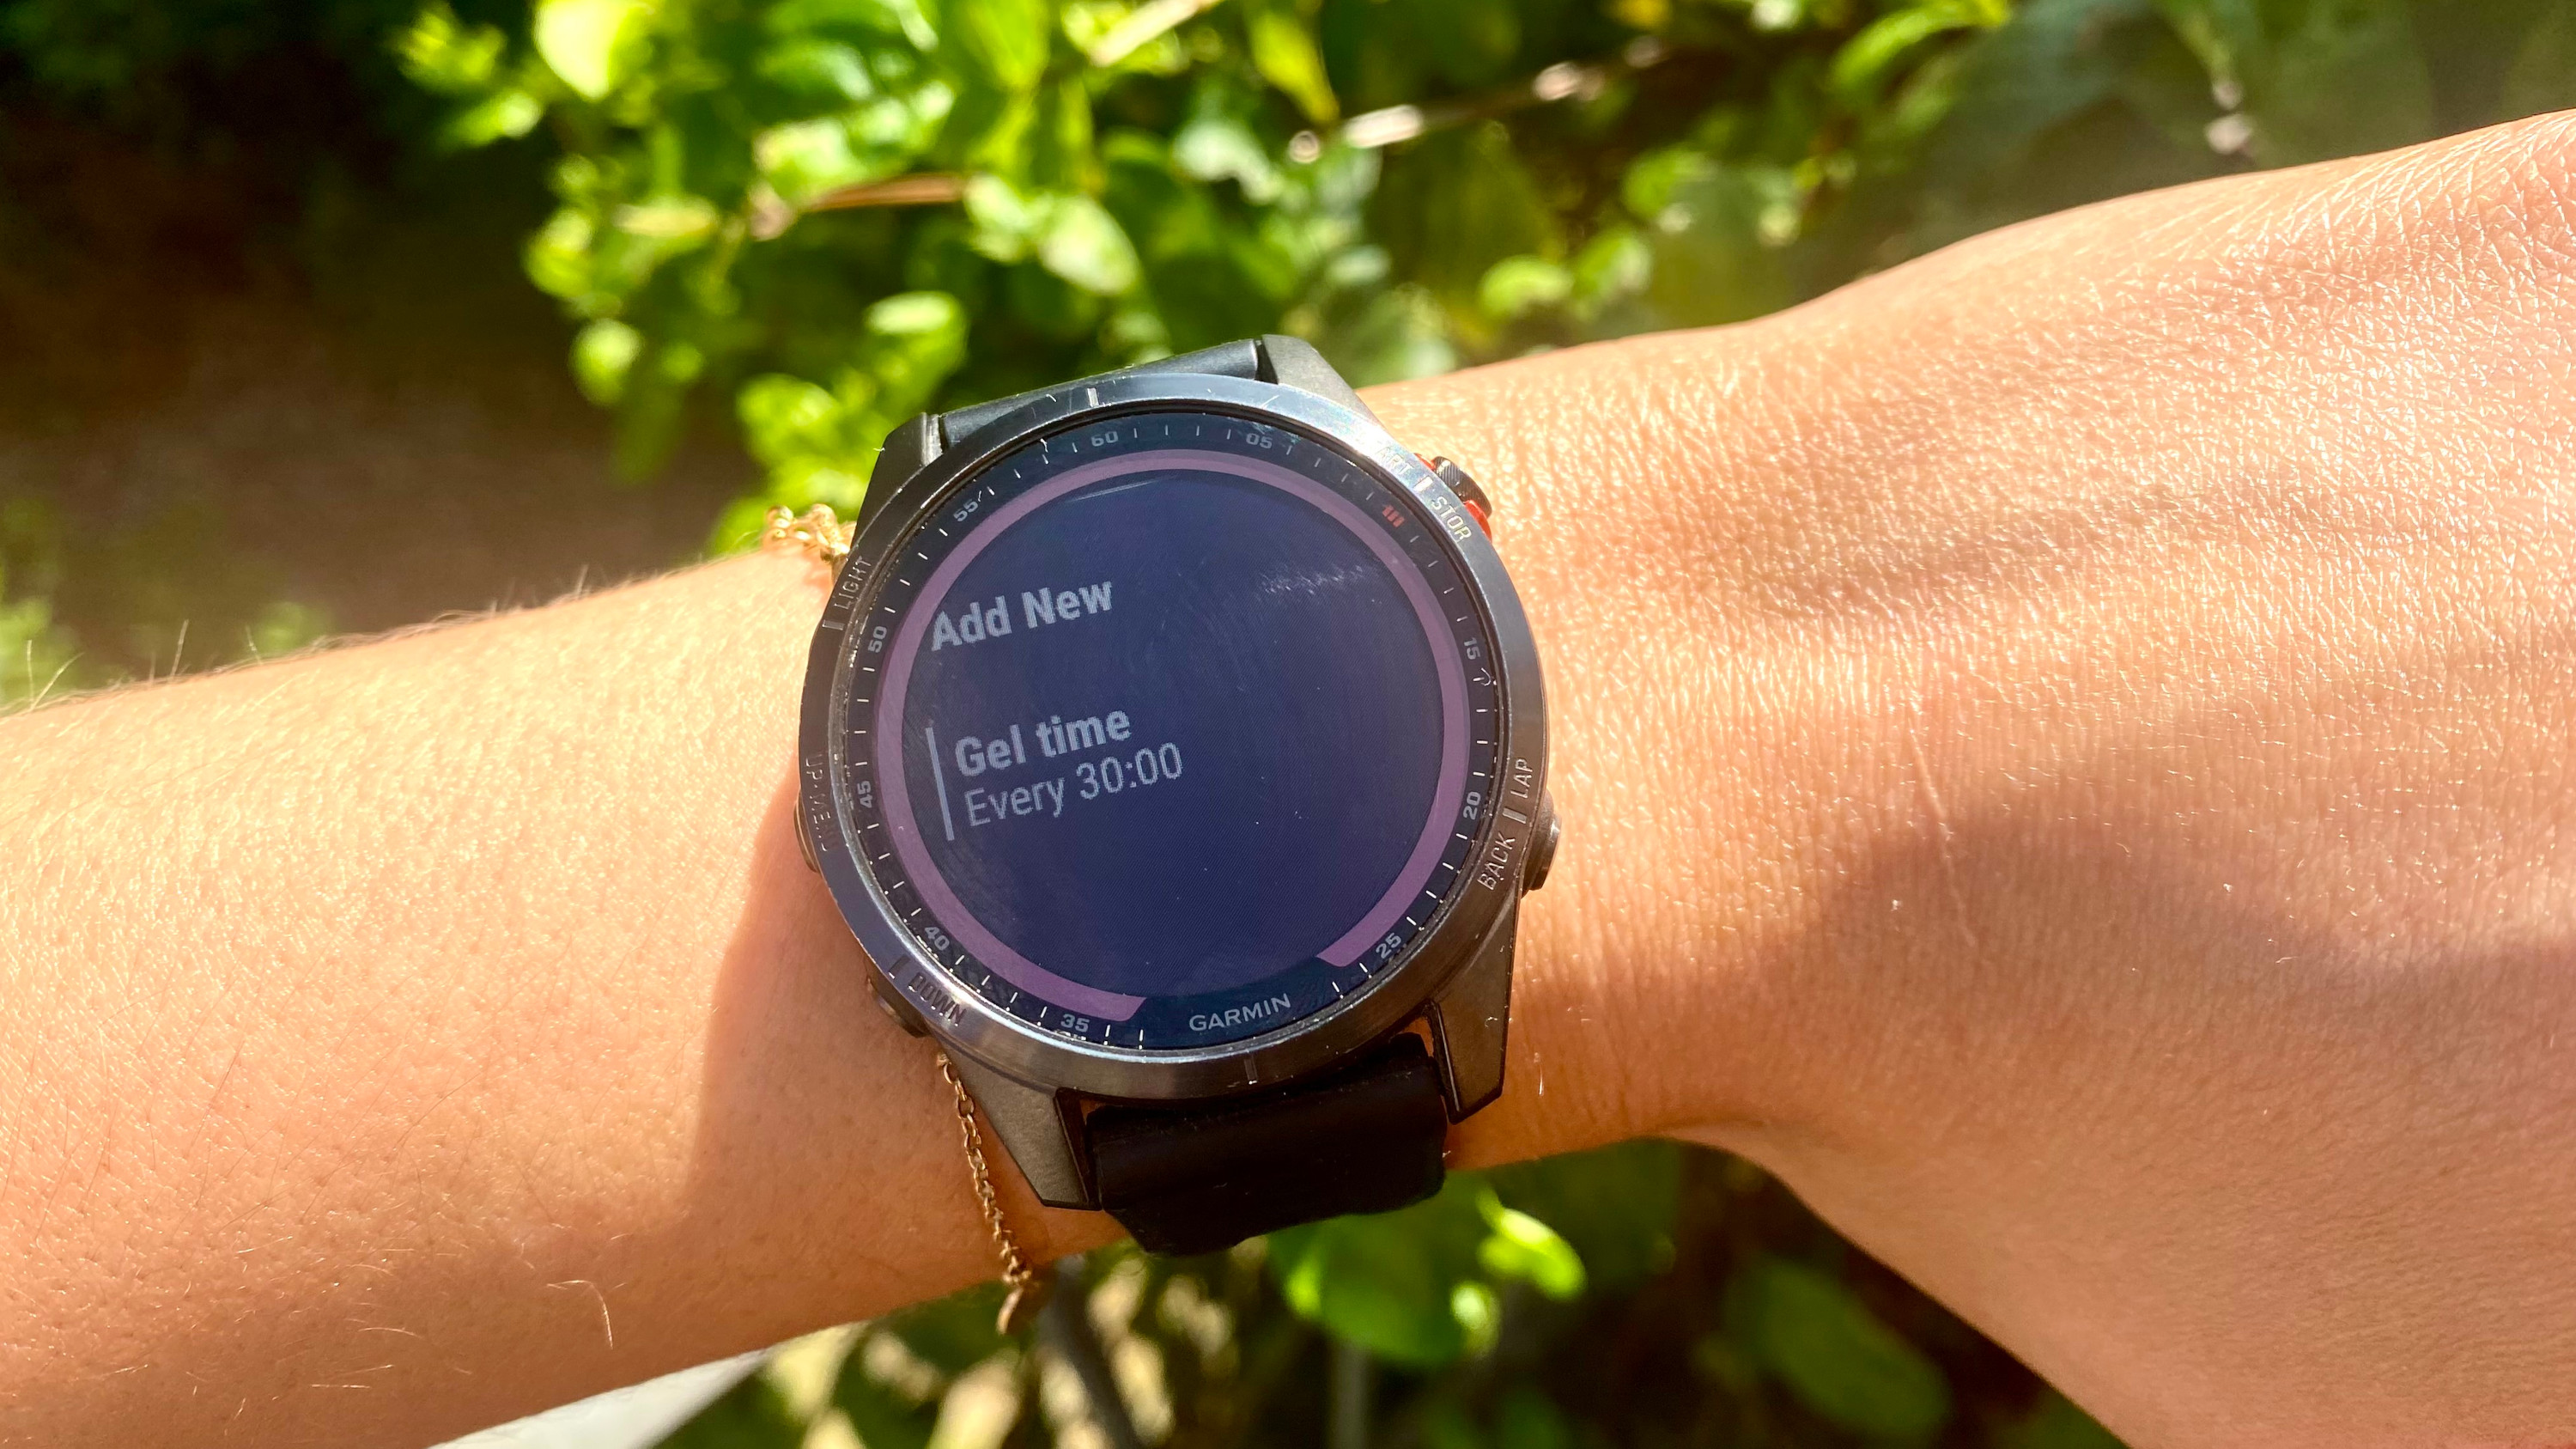 Jessica's Garmin watch displaying the gel alert she manually set up on the watch